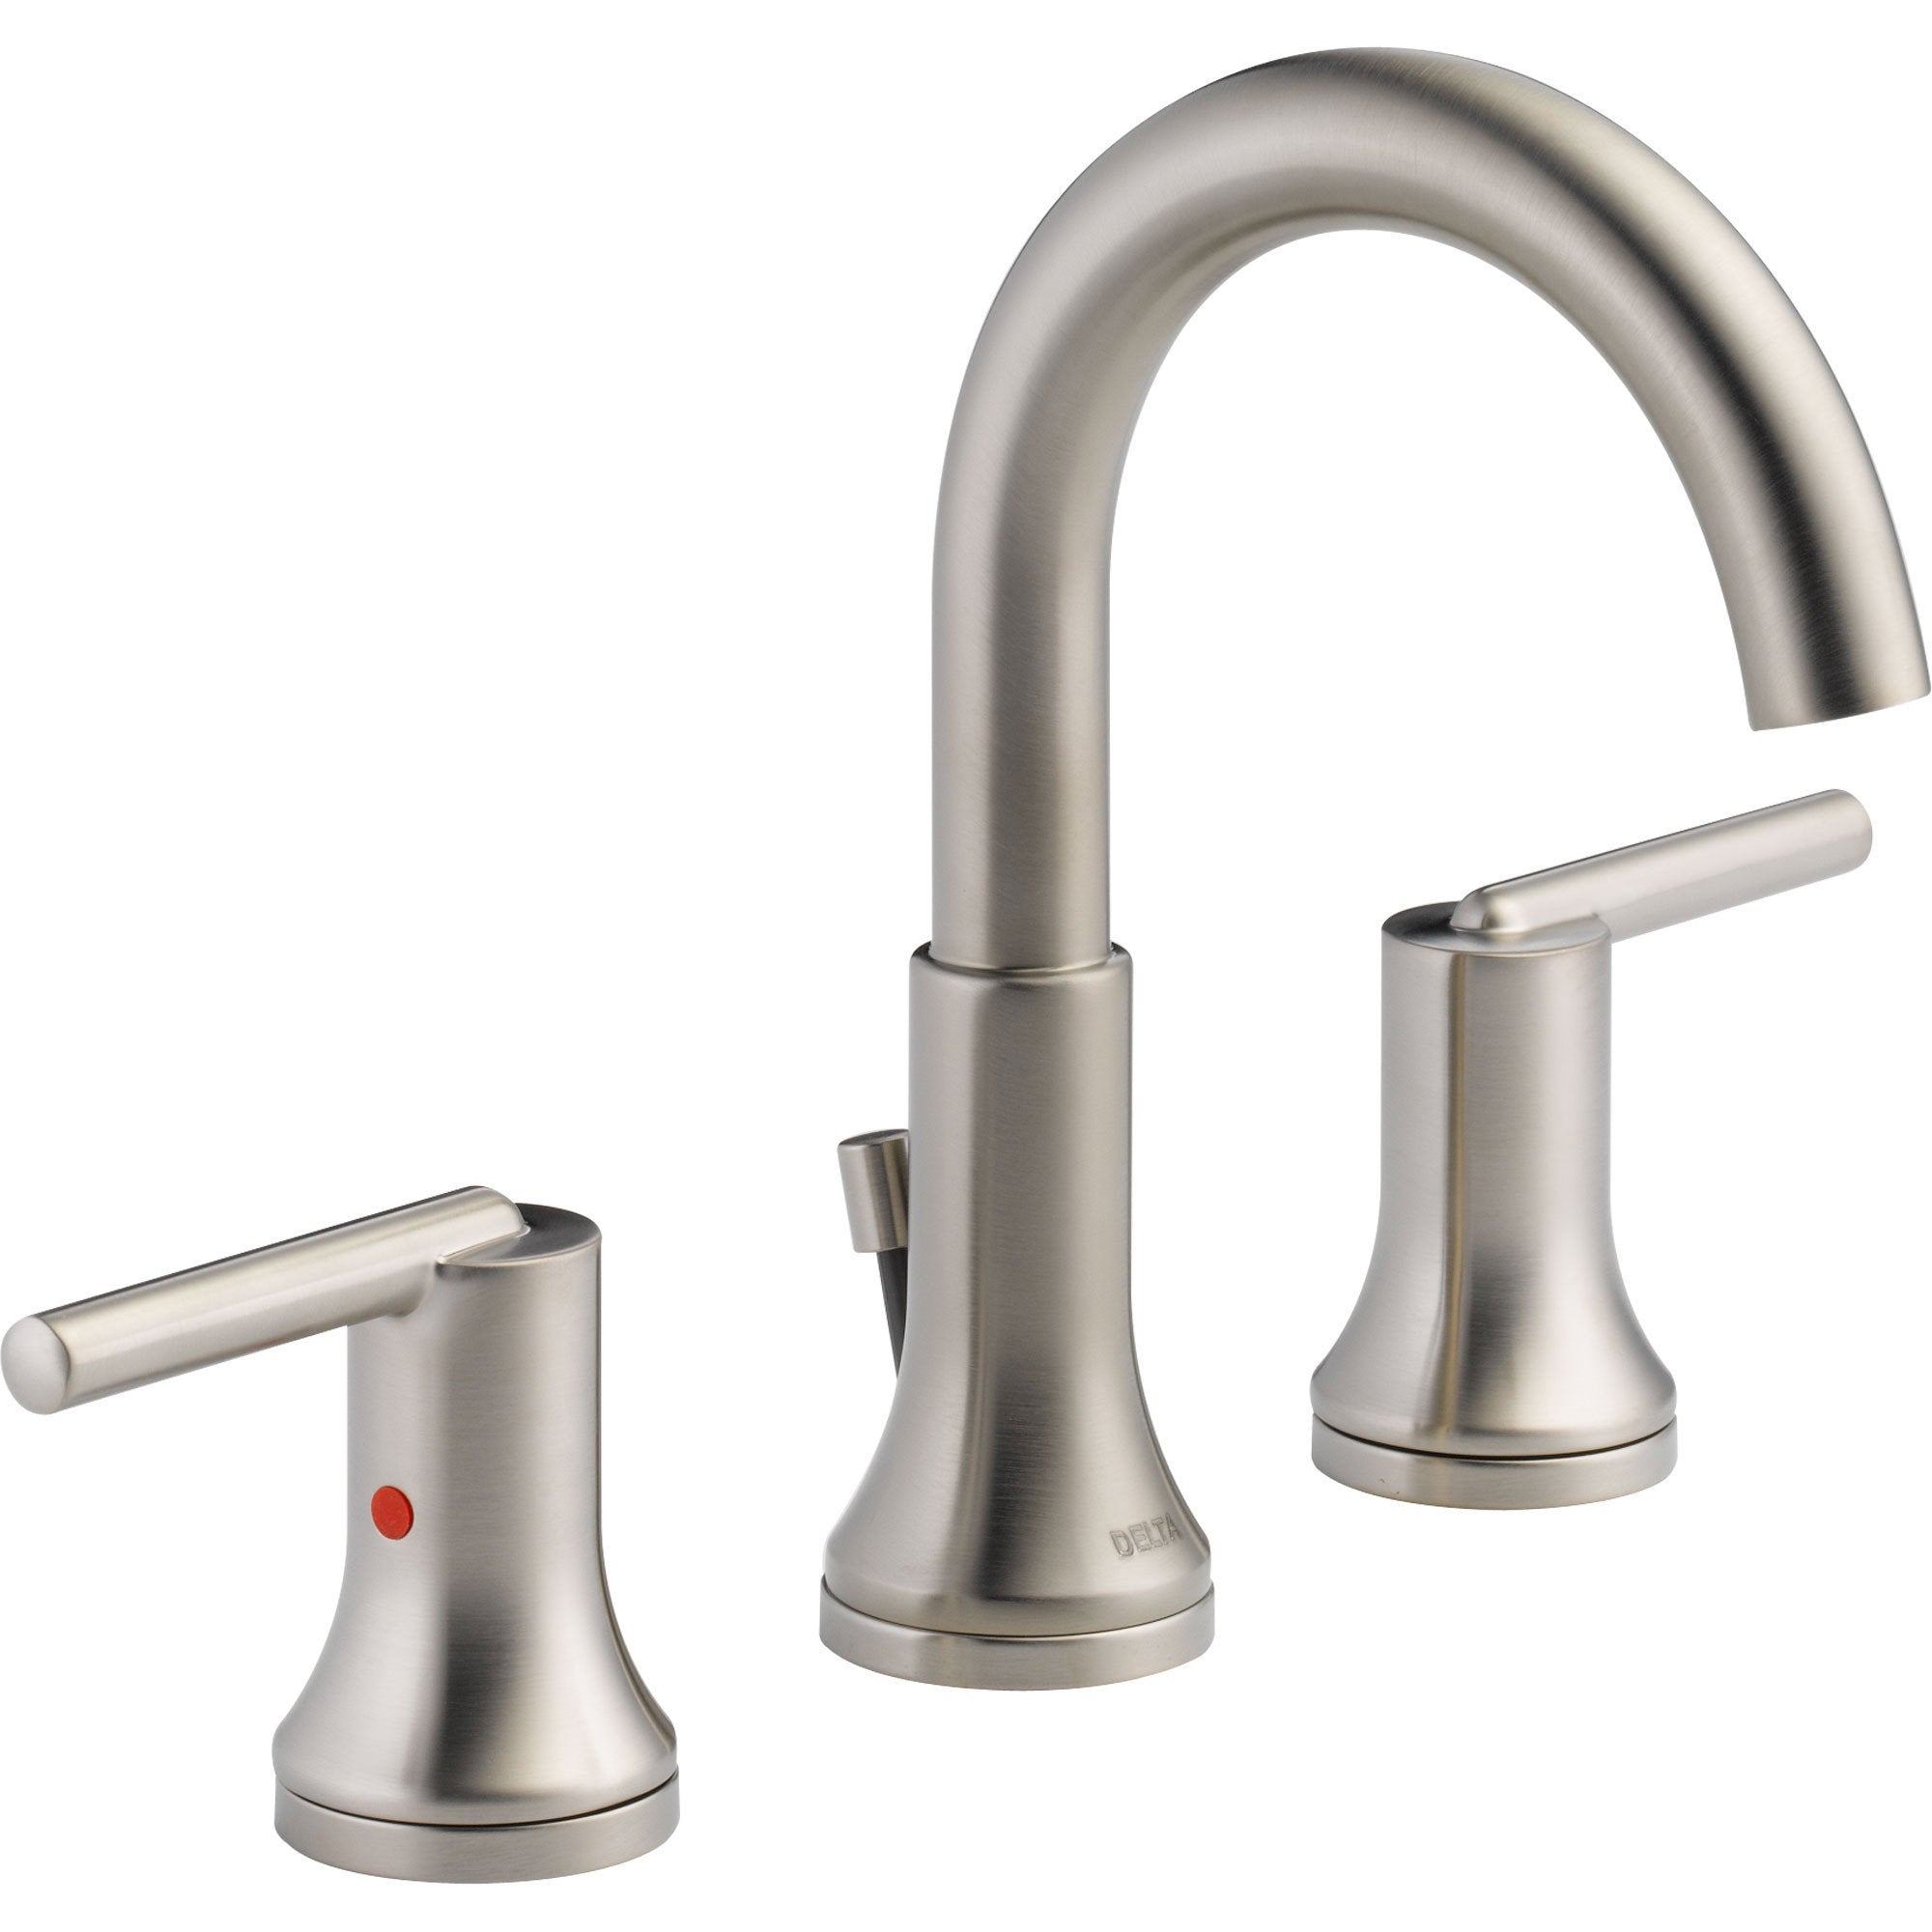 Delta Trinsic Modern Stainless Finish Widespread High Arc Bathroom Faucet 614923